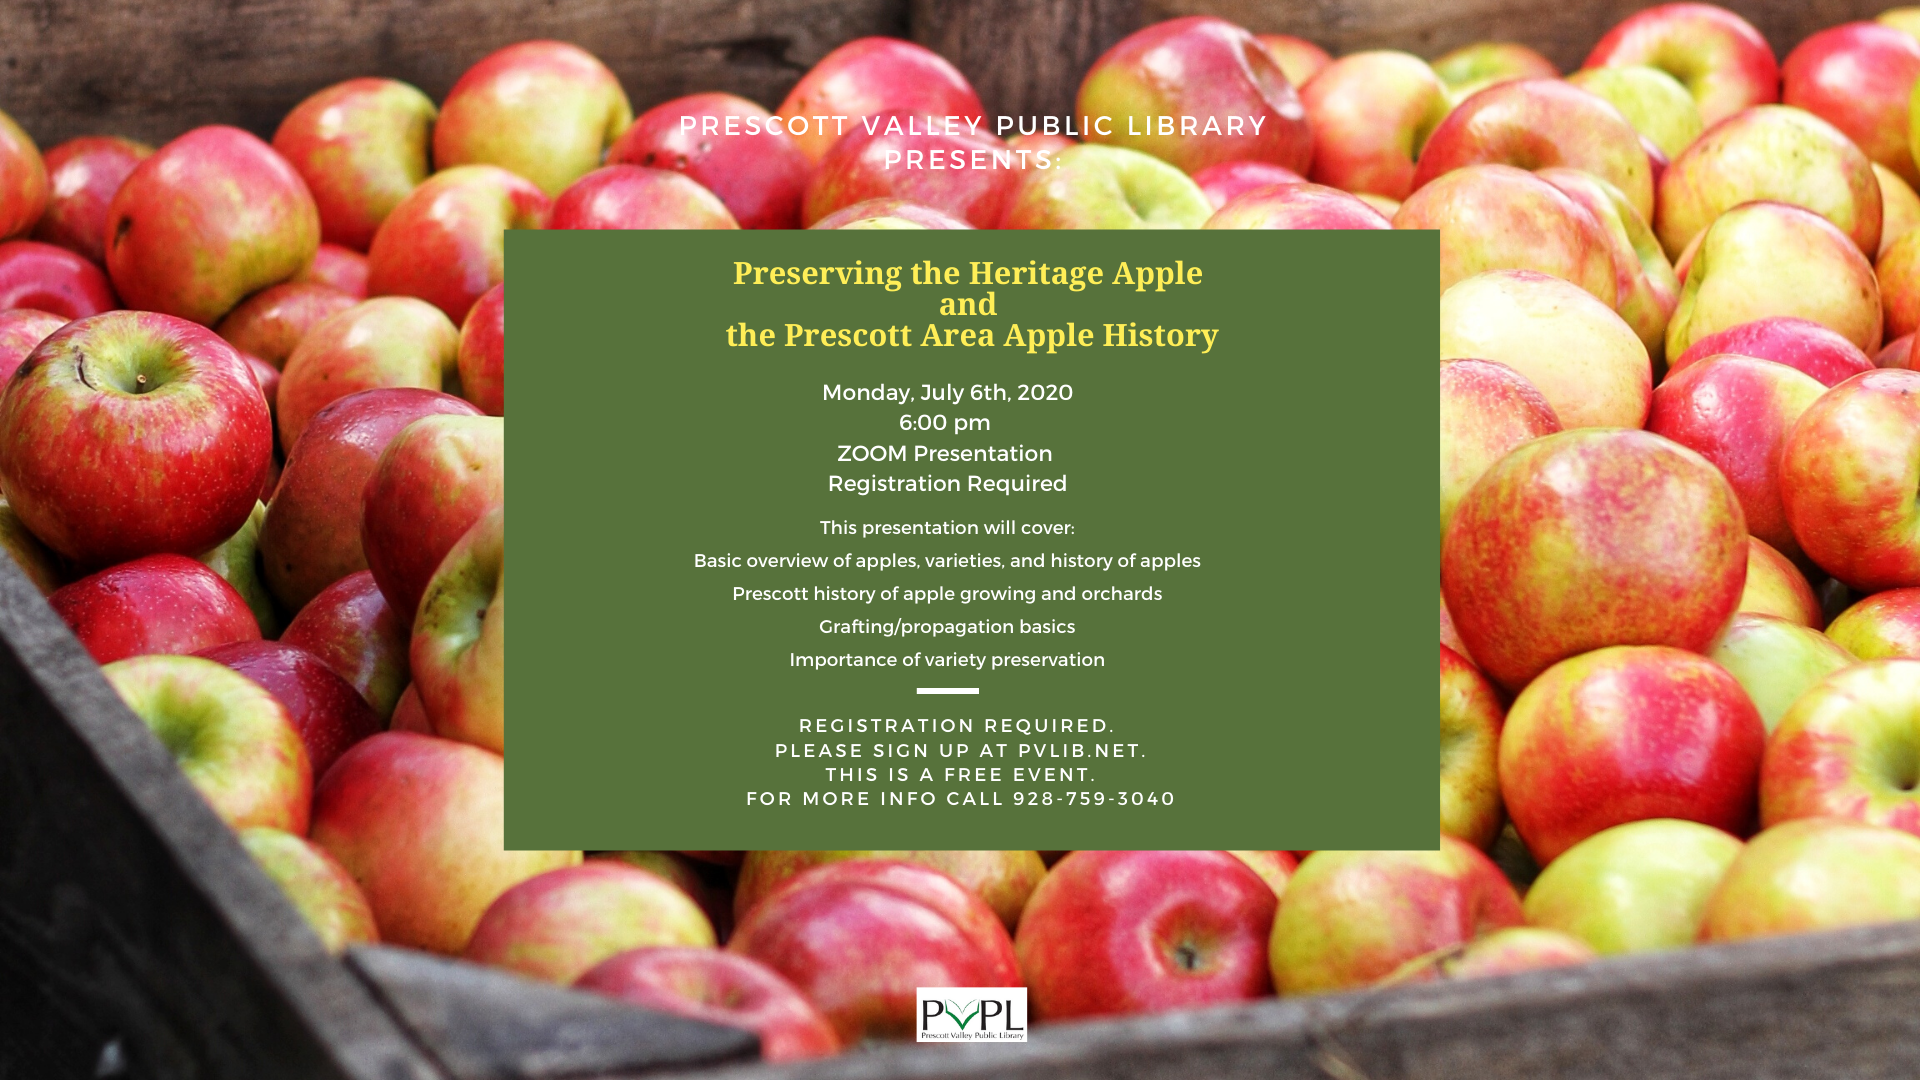 Virtual Program - Preserving the Heritage Apple and the Prescott Area Apple History – Registration Required